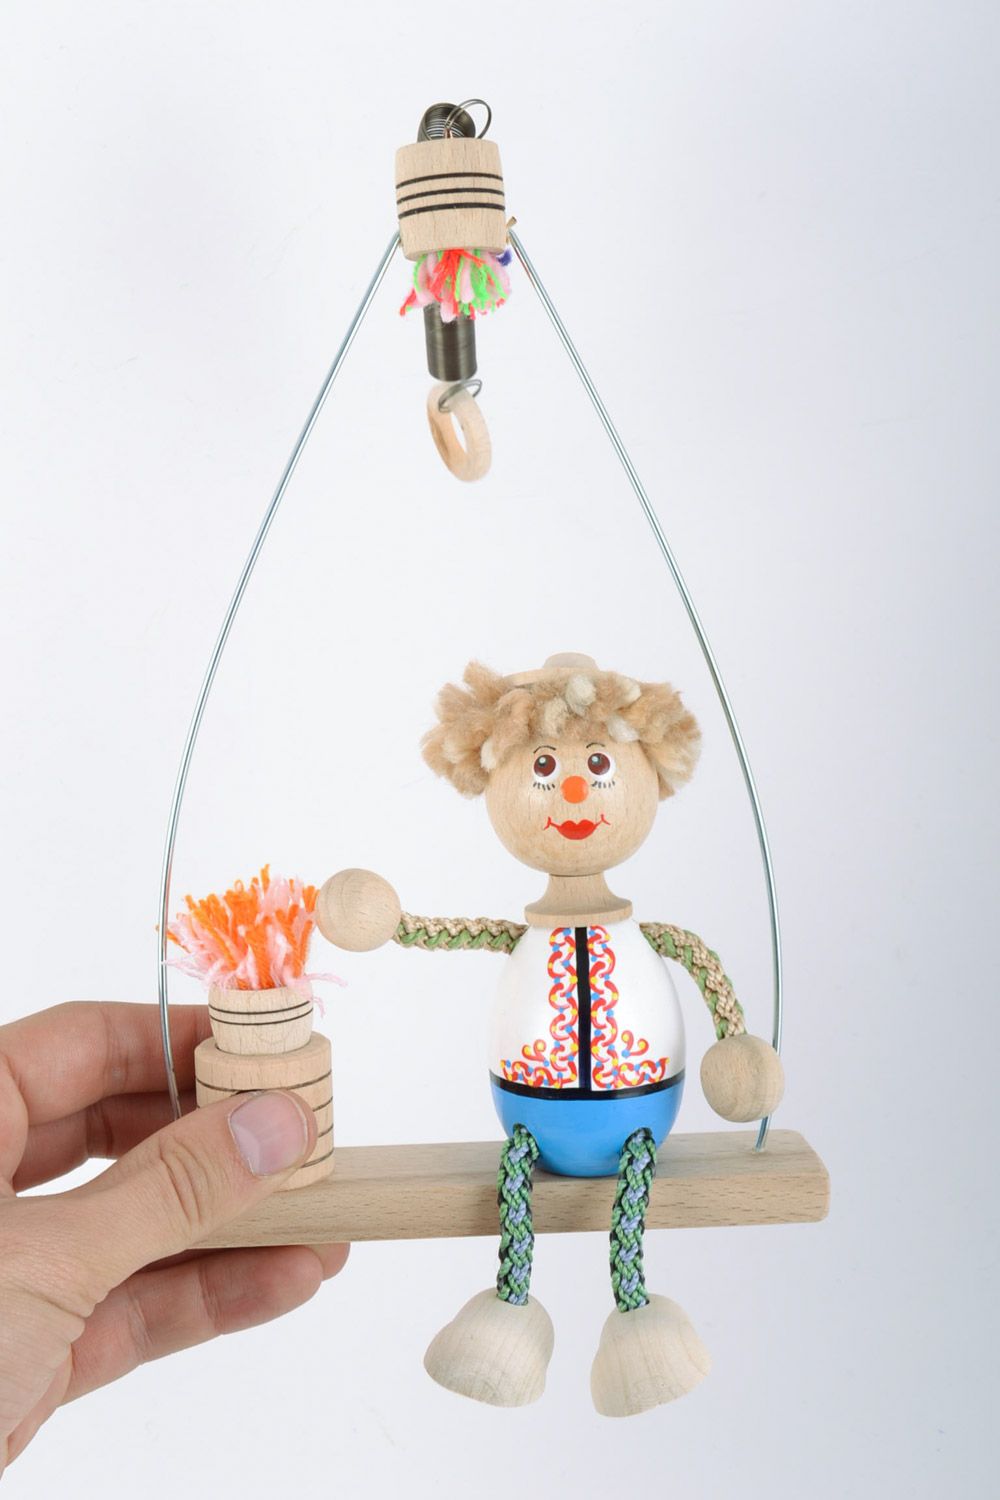 Collectible handmade painted wooden eco toy boy on swing photo 2